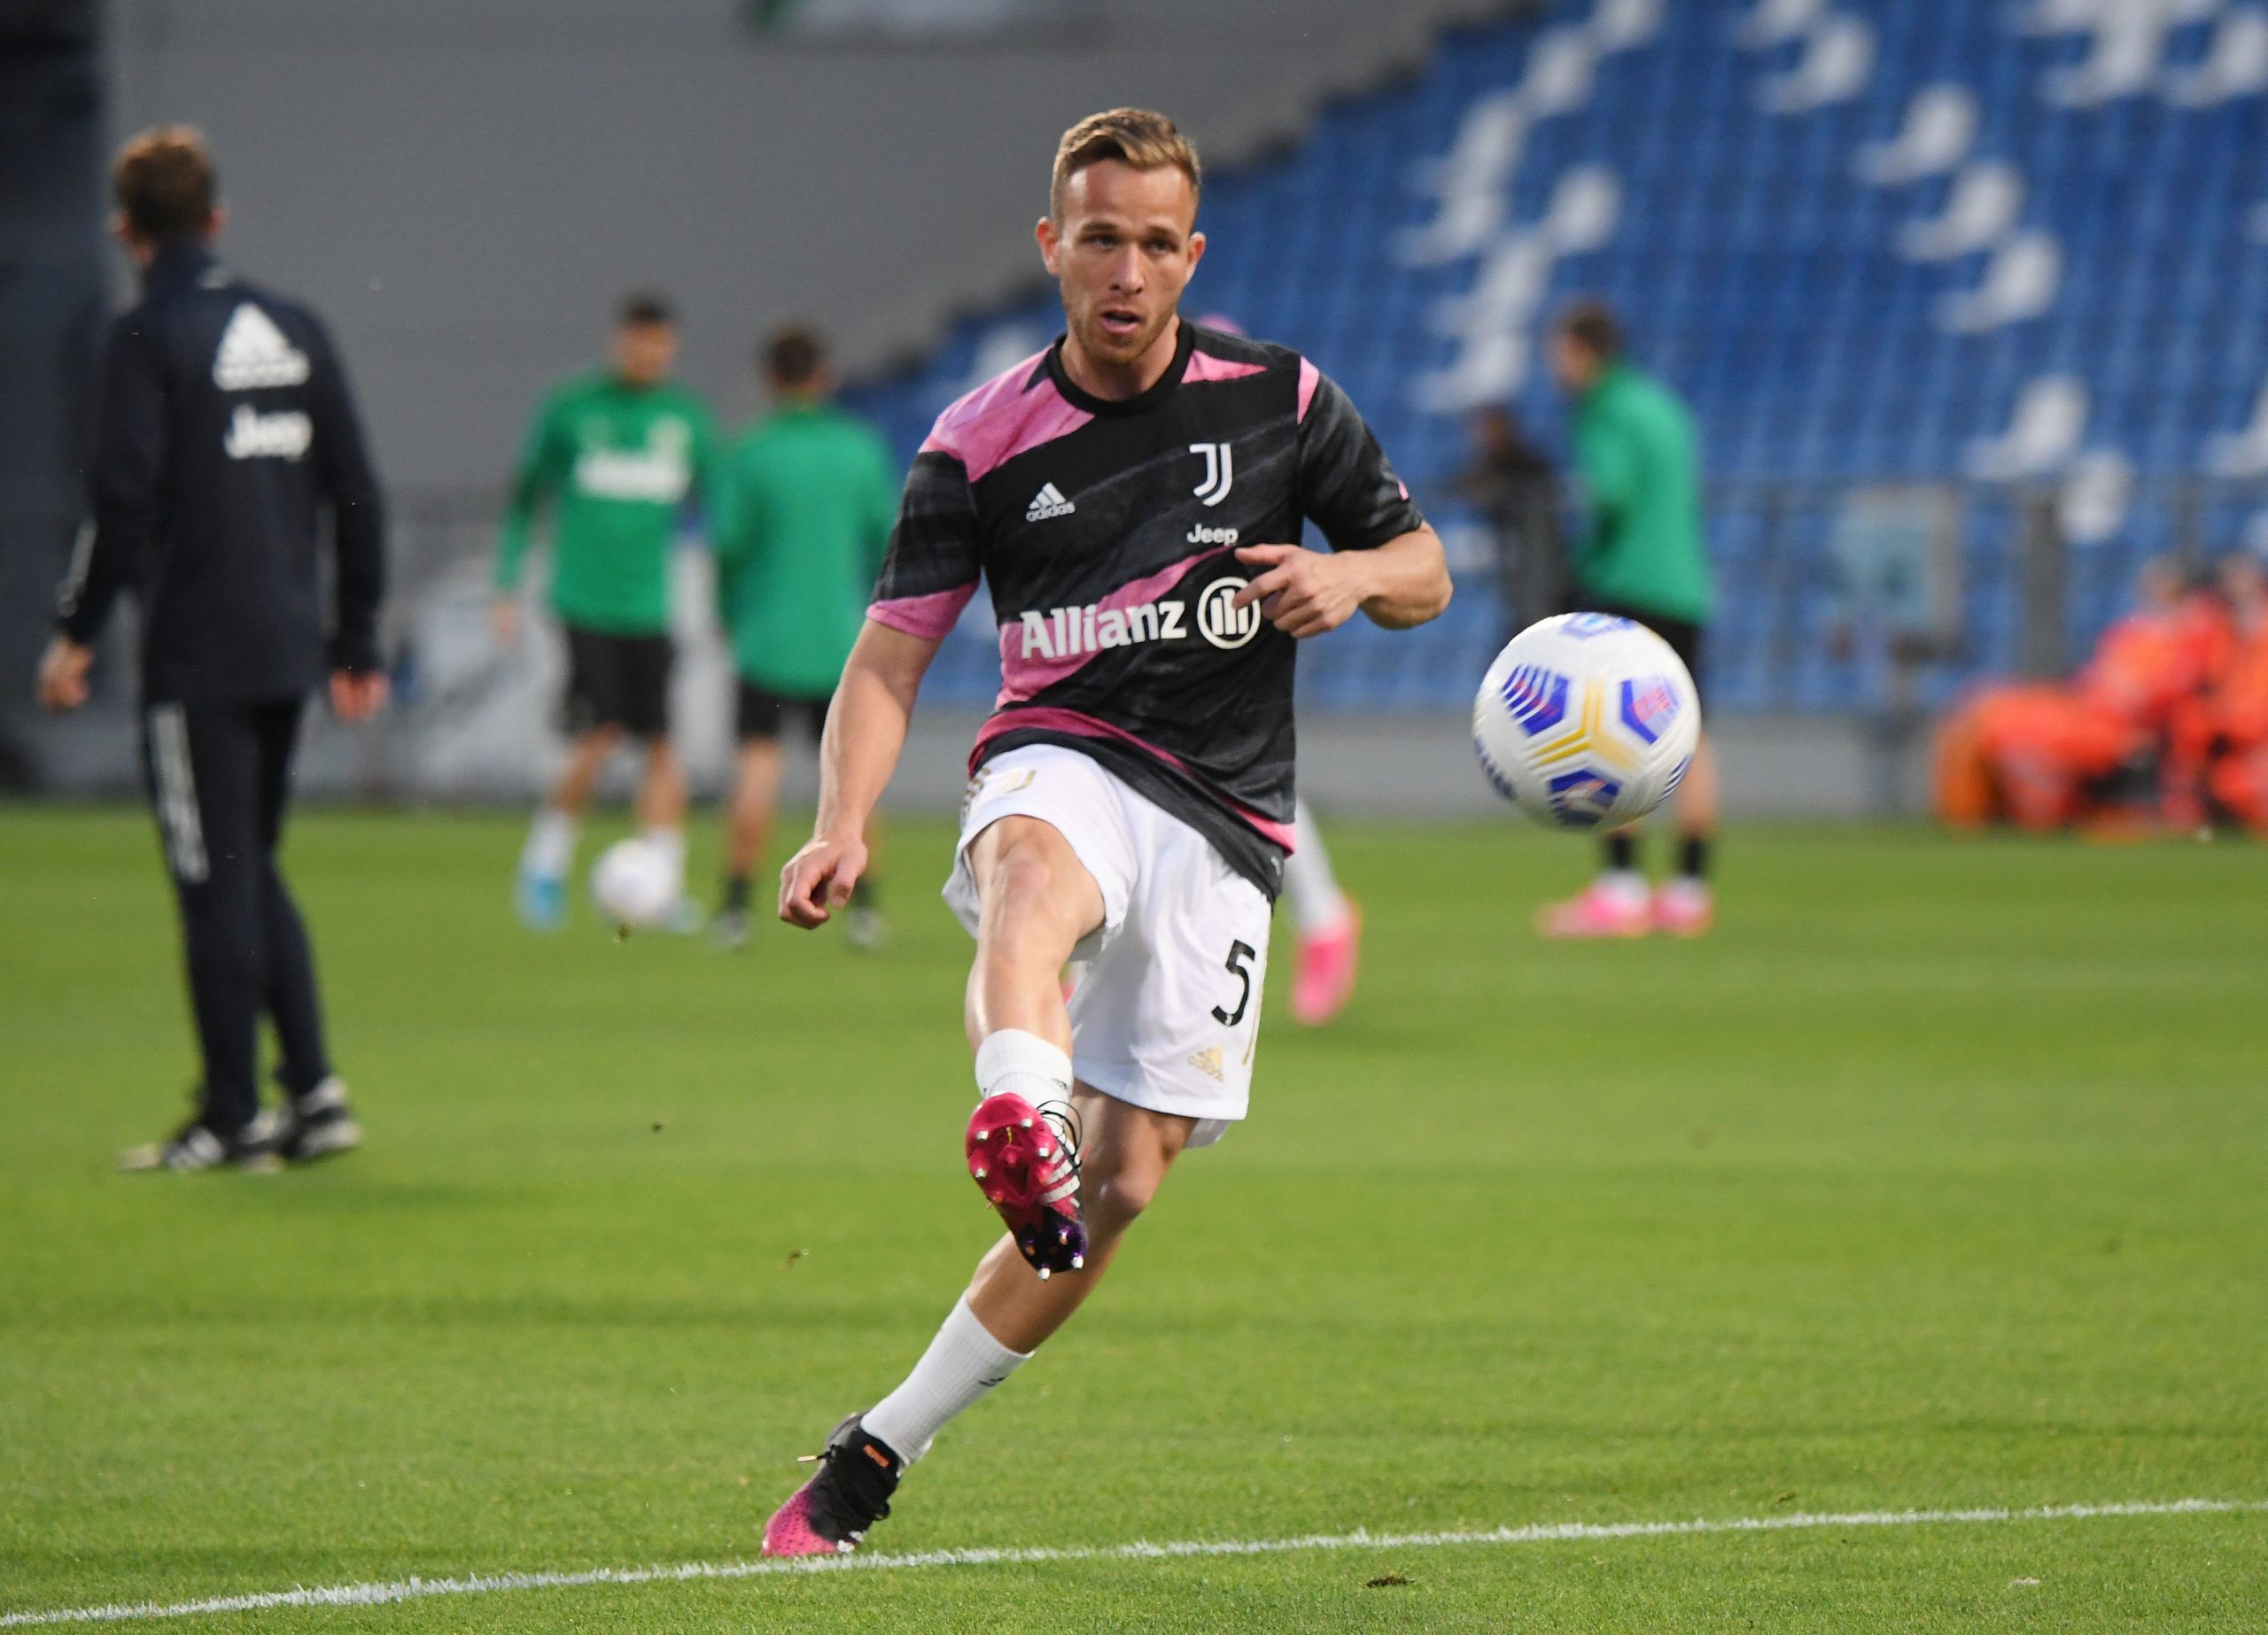 Juventus' Arthur during the warm up before the match